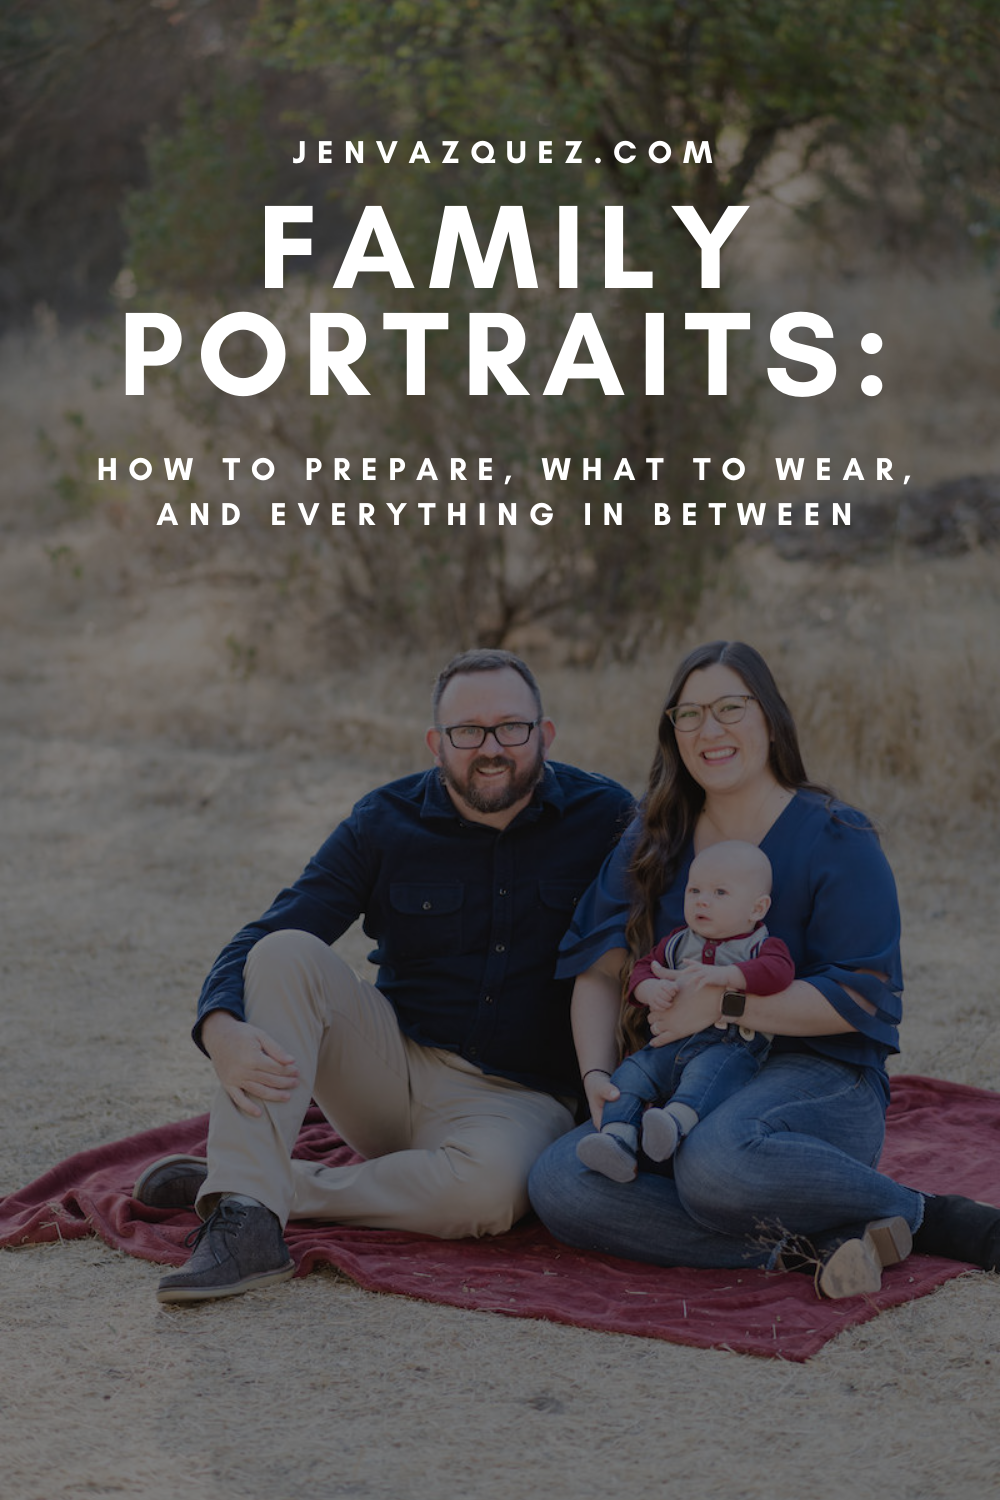 FAMILY PORTRAITS: How to prepare, What to Wear, and everything in between